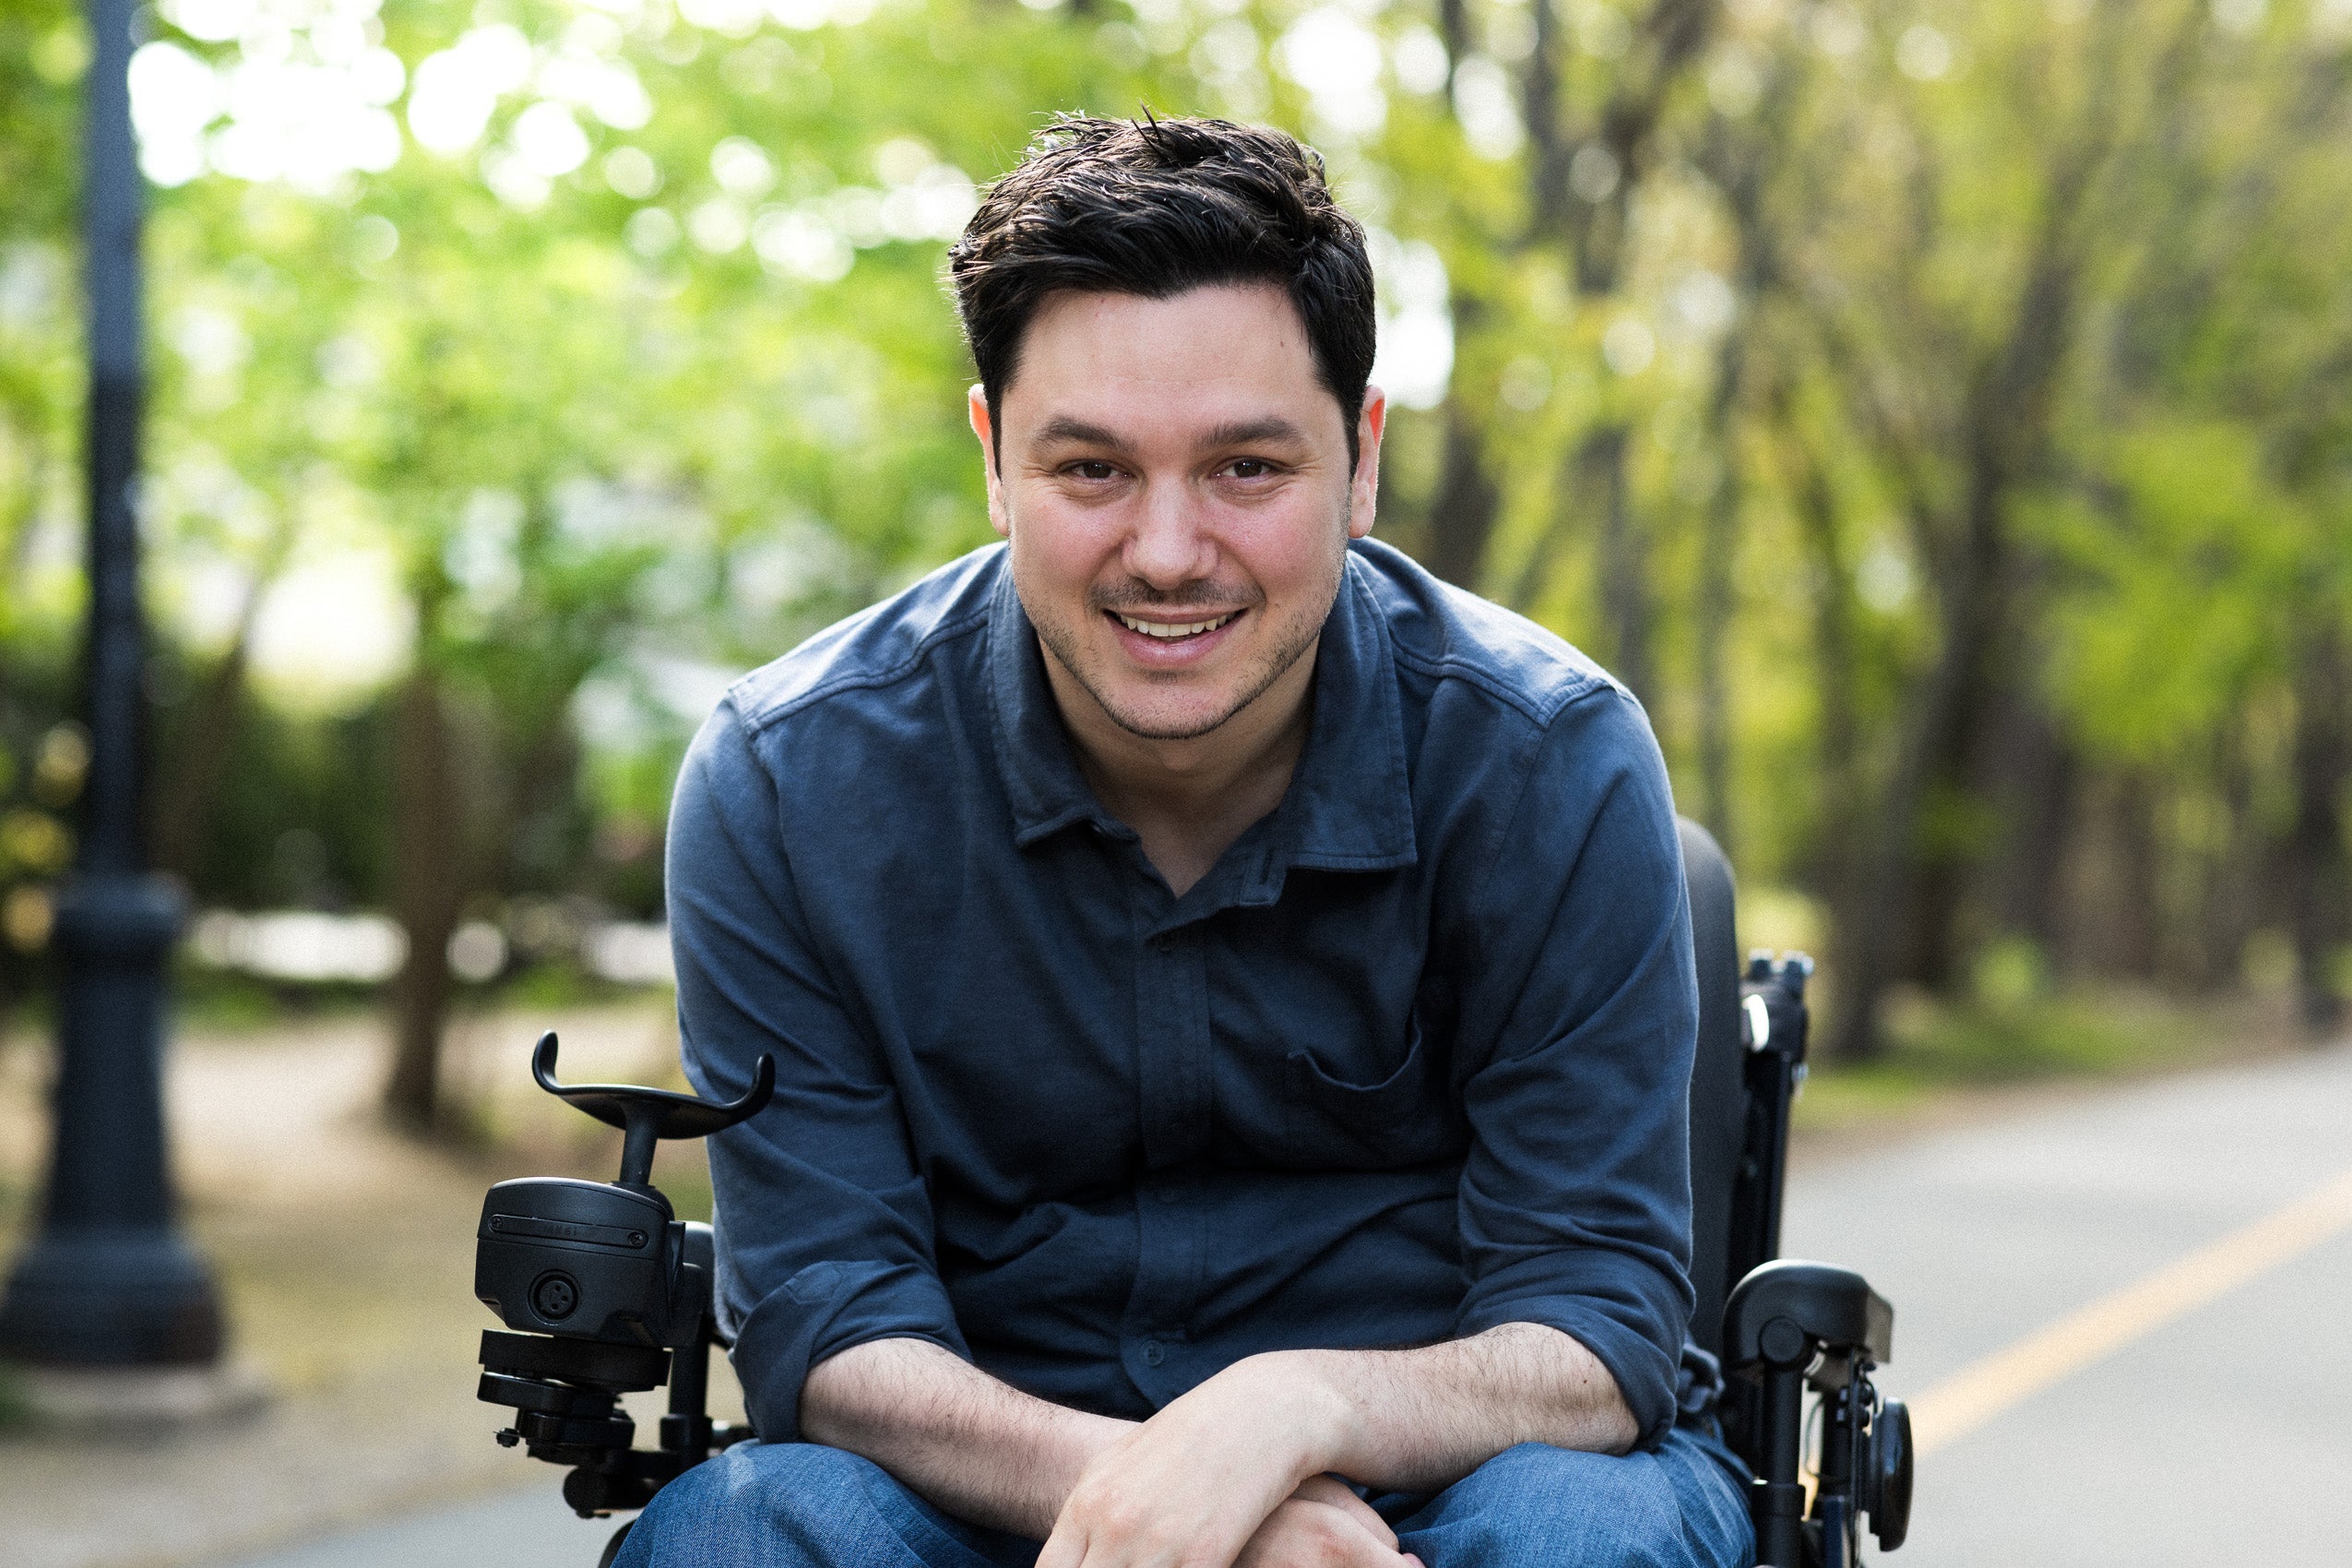 man wearing a blue shirt and jeans sitting in a wheel chair